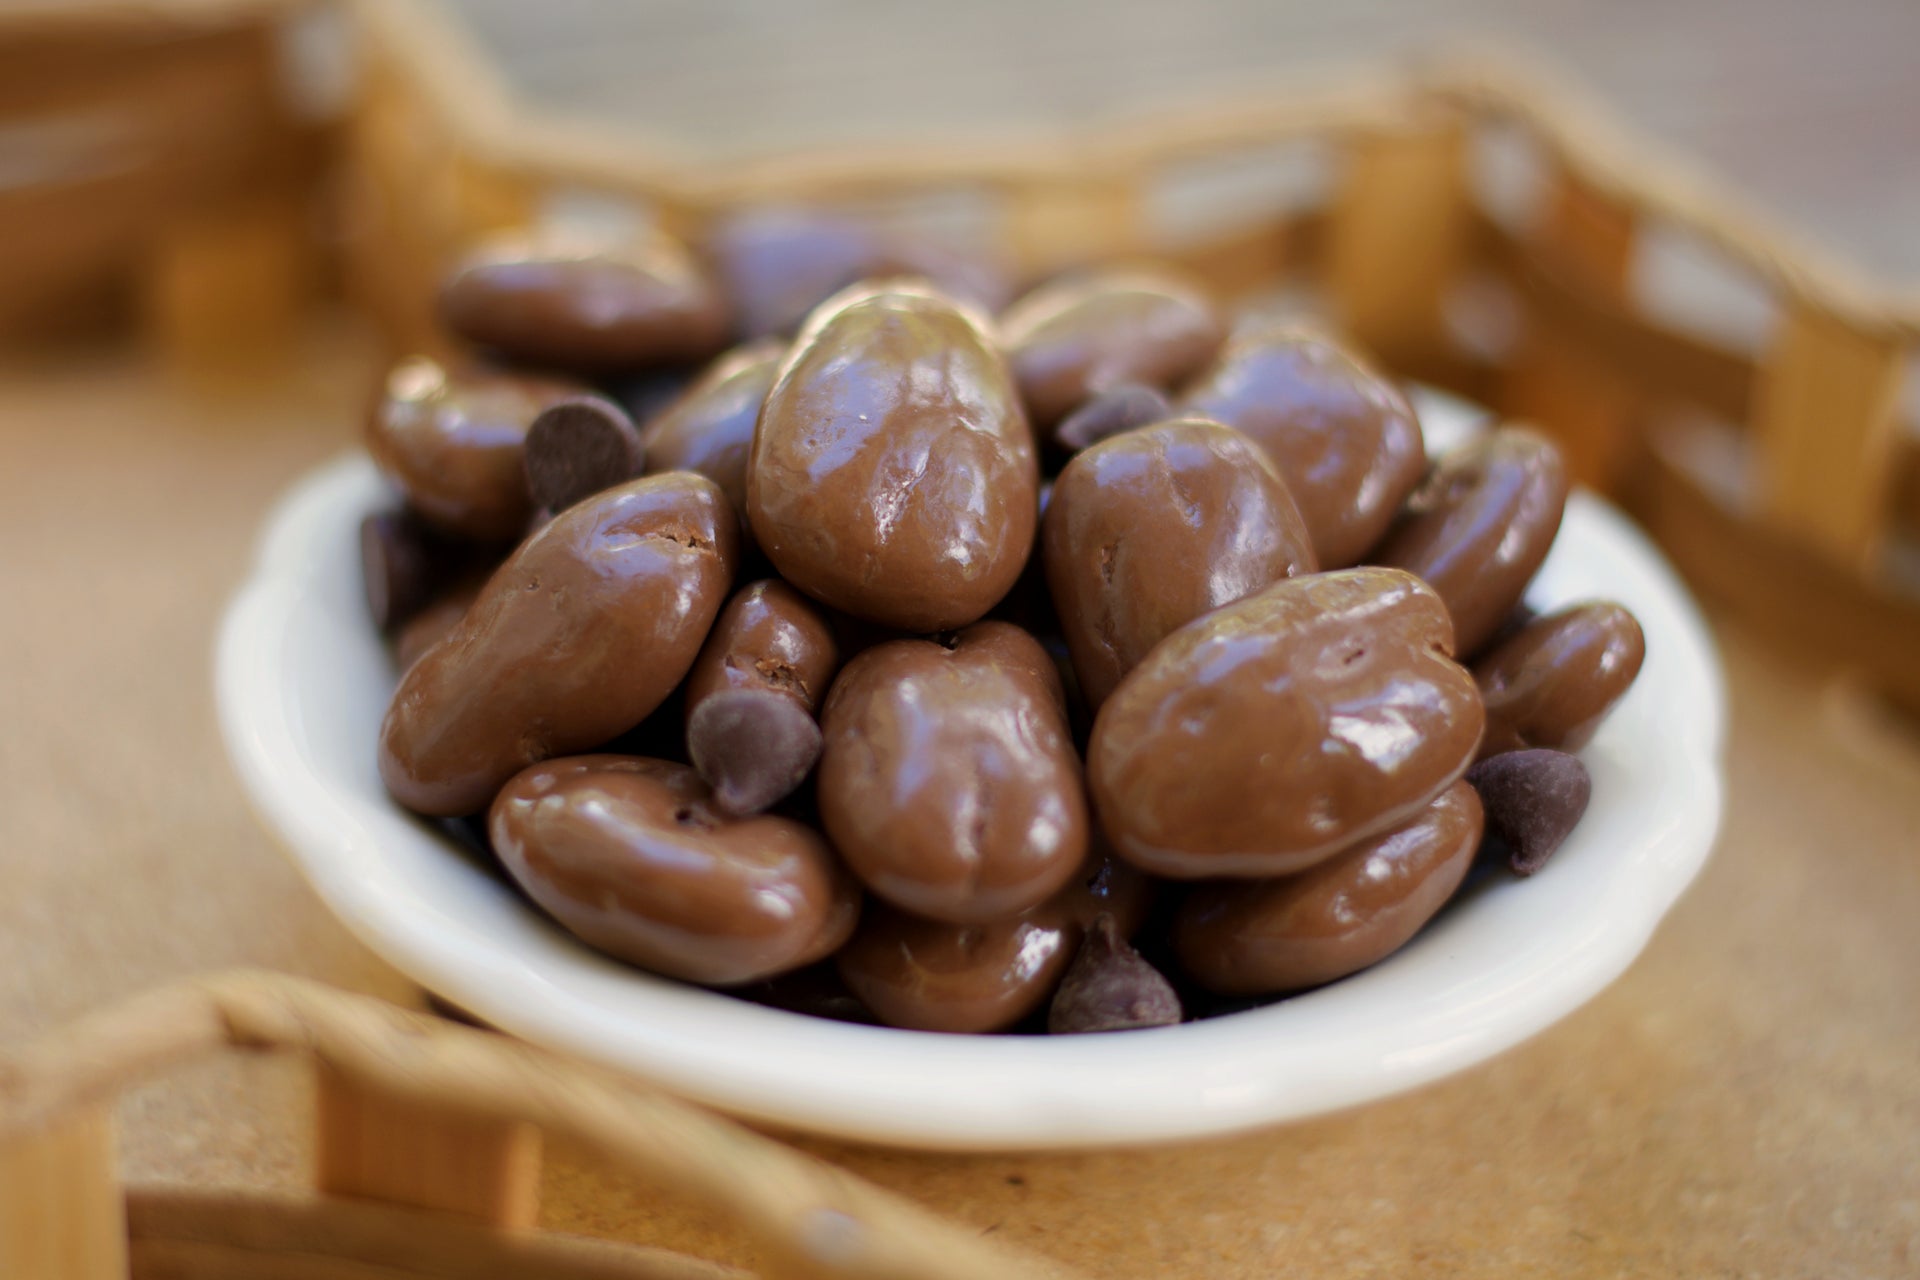 Our sugar free chocolate coated pecan halves are just what the doctor ordered! Available in 16 ounce bags.